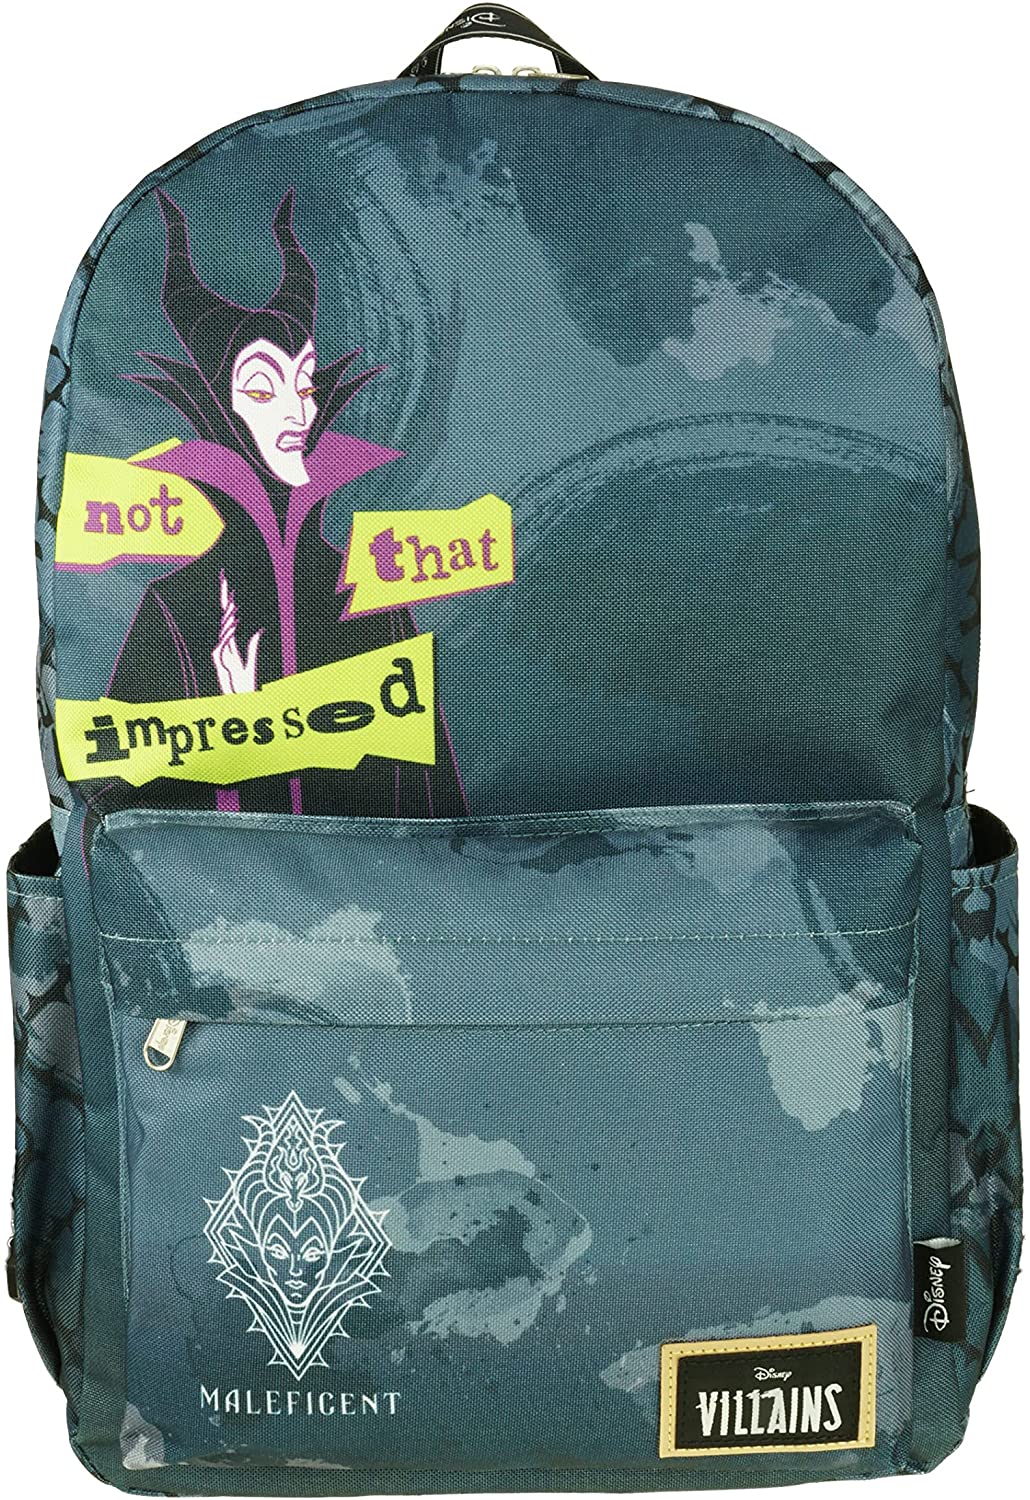 Classic Disney Villains - Maleficent Backpack with Laptop Compartment for School (Maleficent) - GTE Zone